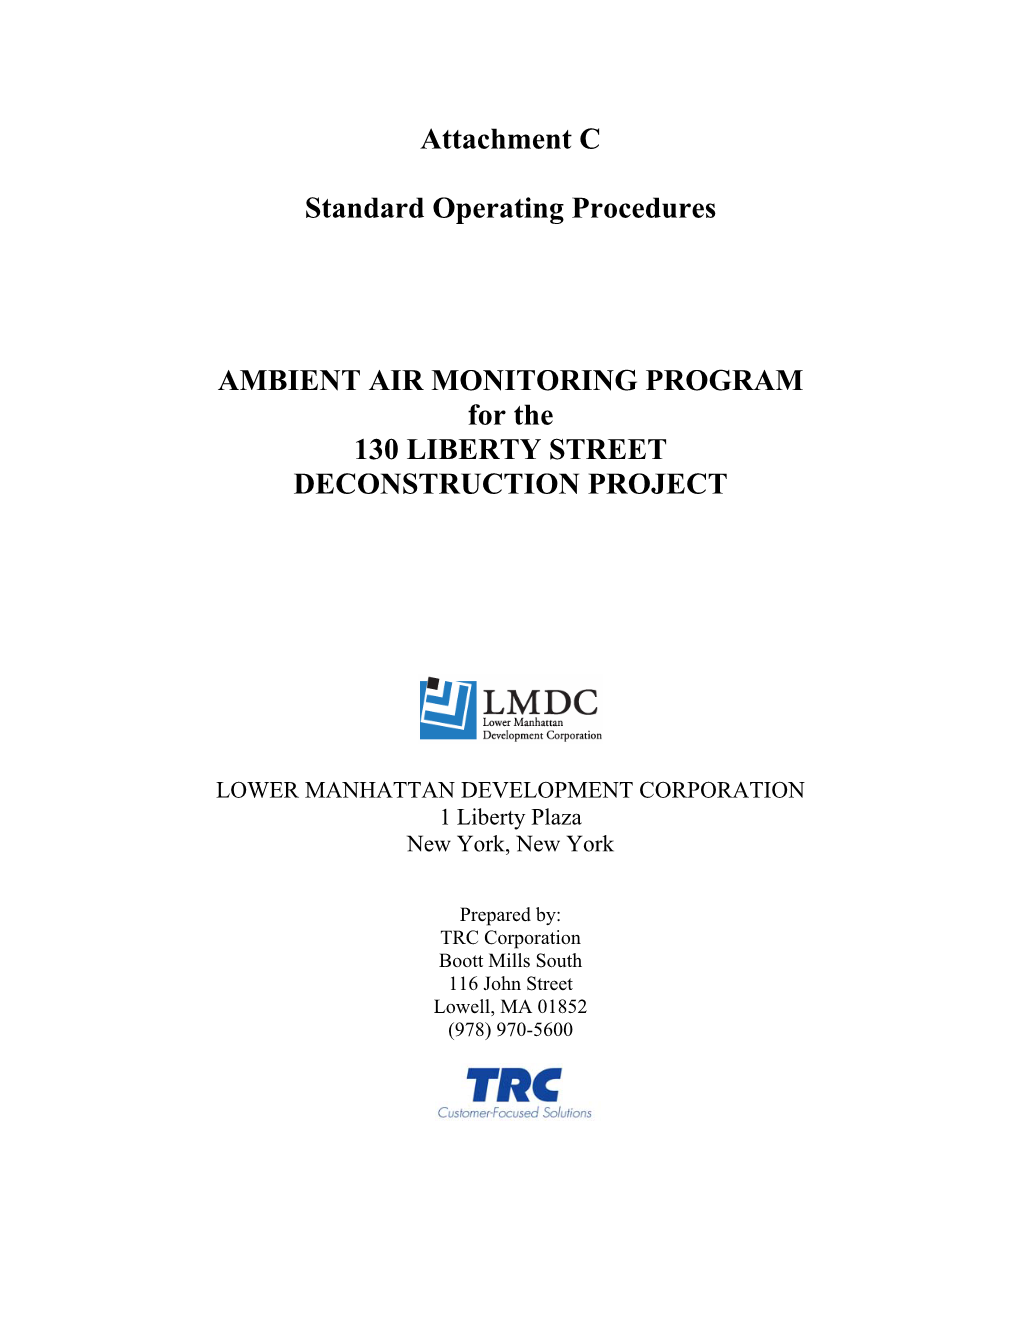 Attachment C Standard Operating Procedures AMBIENT AIR MONITORING PROGRAM For